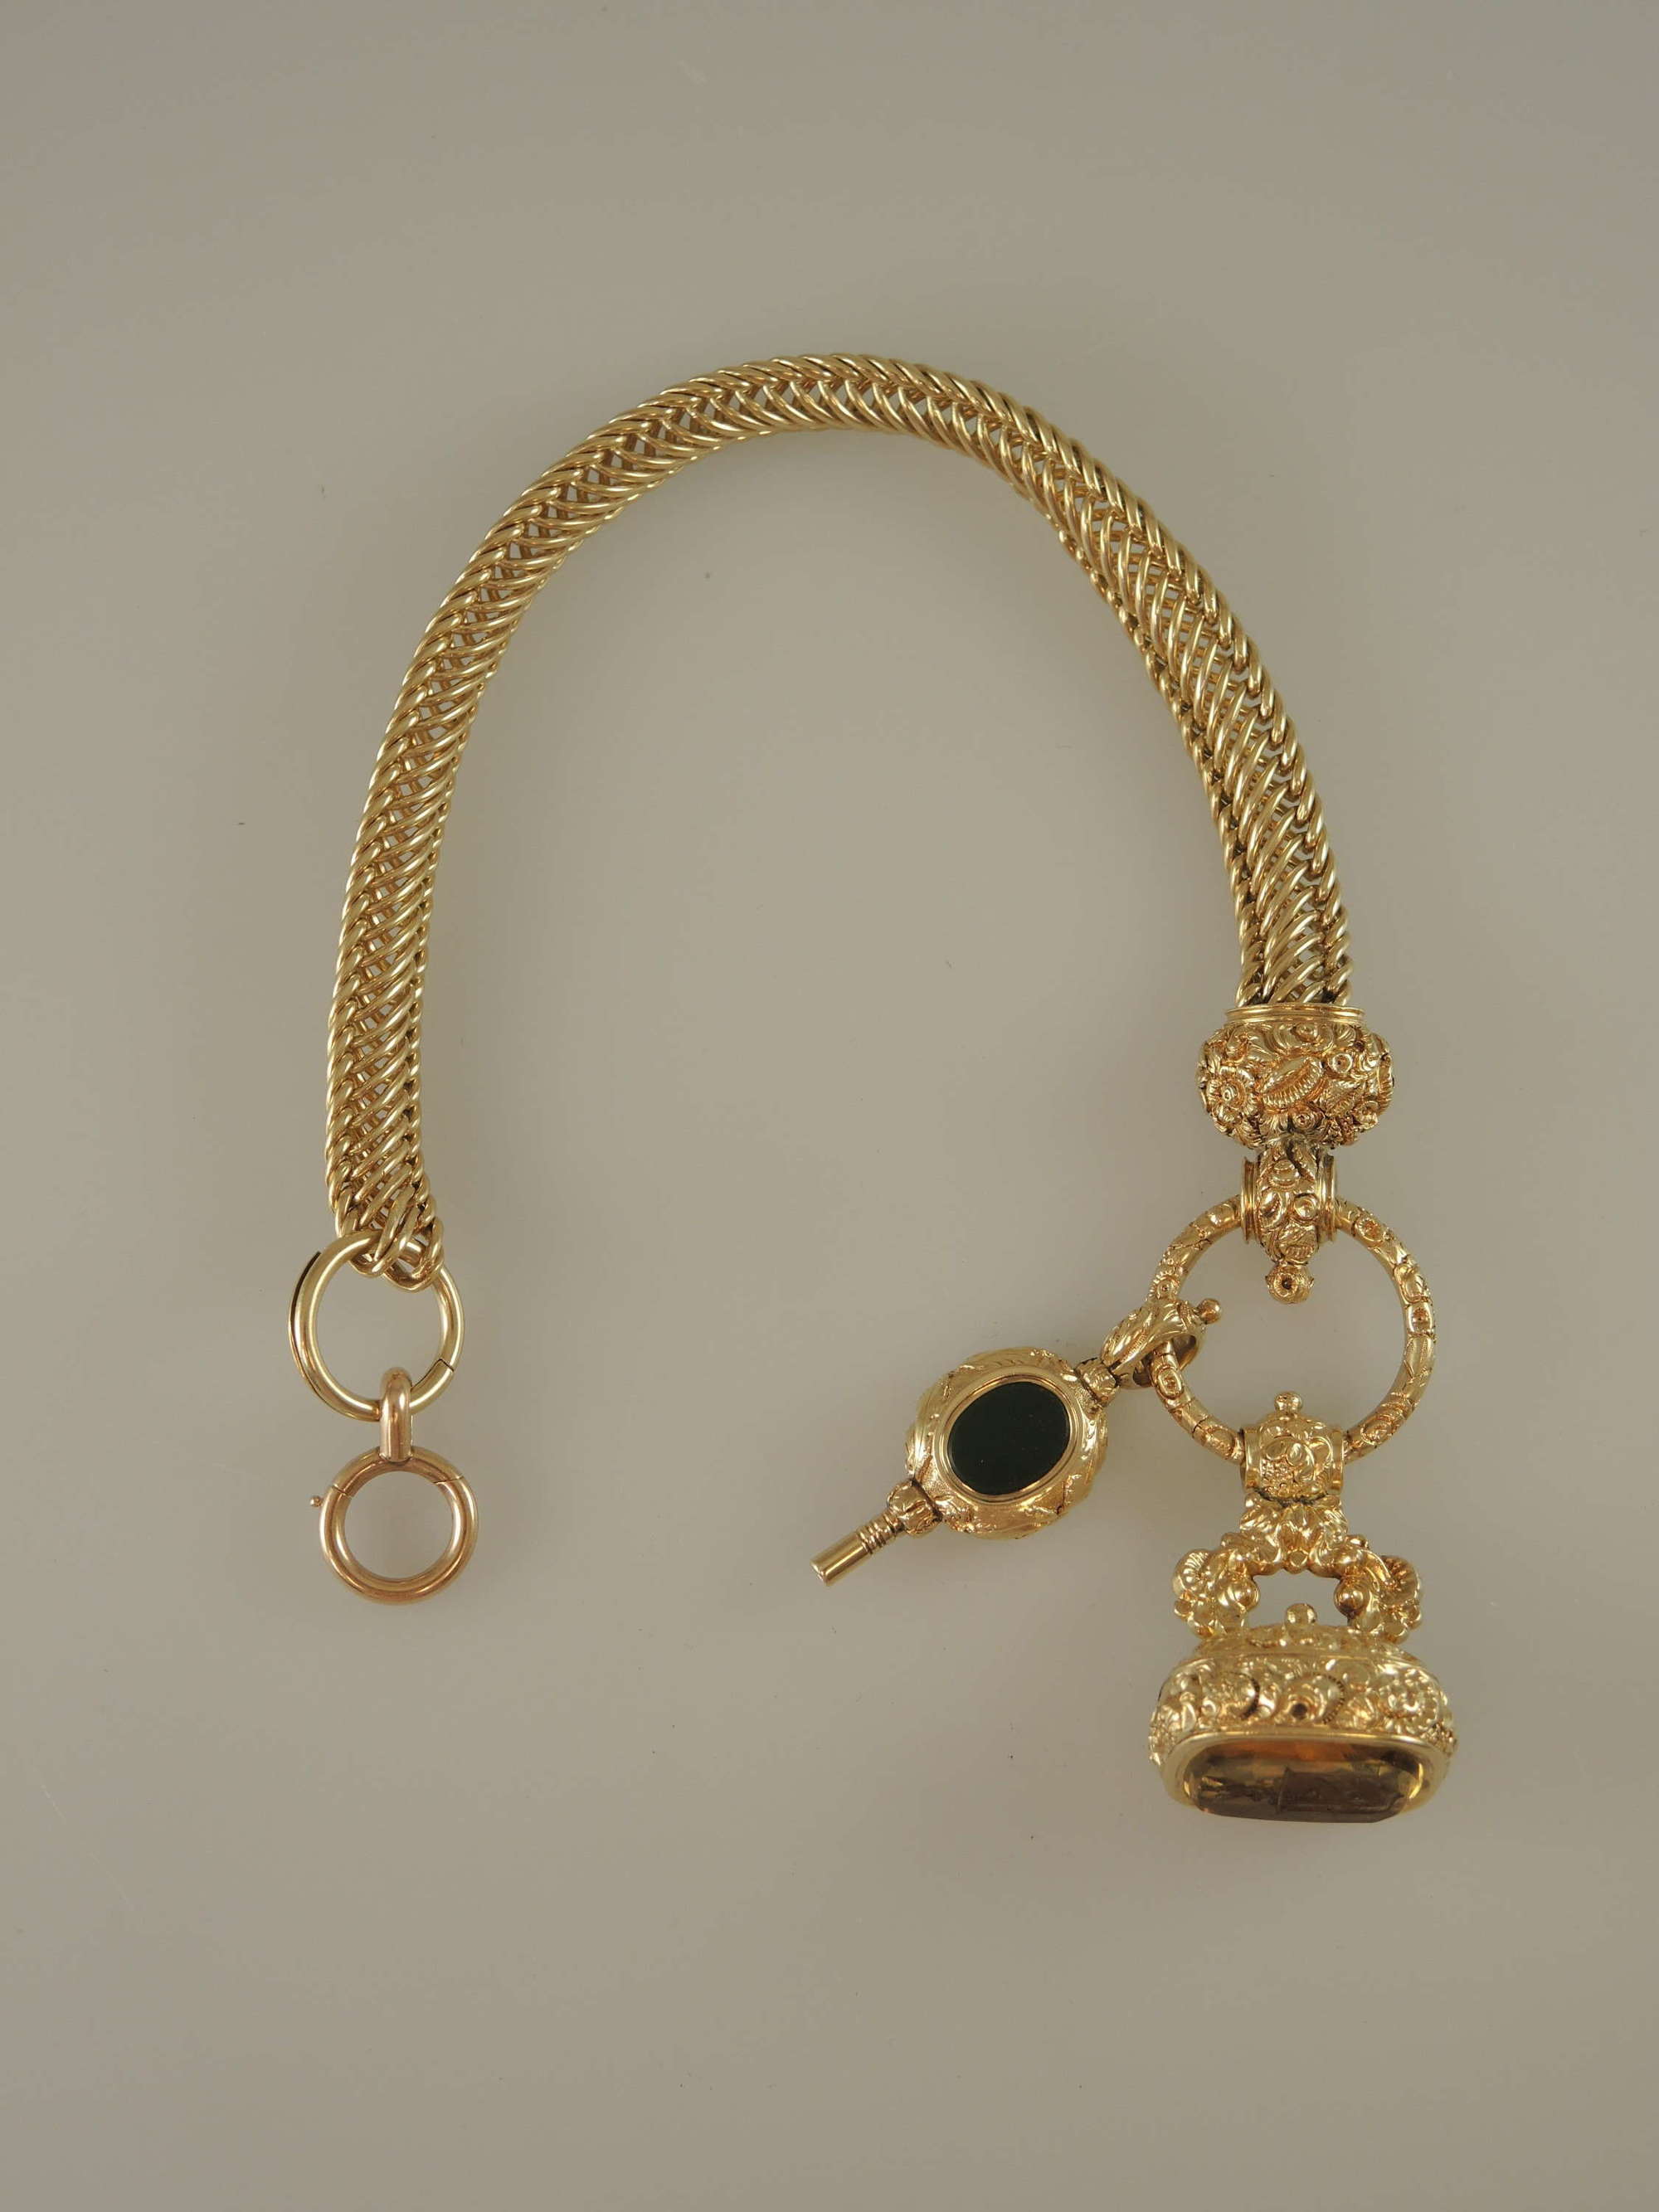 Magnificent 18K Gold watch chain with key and intaglio seal c1850